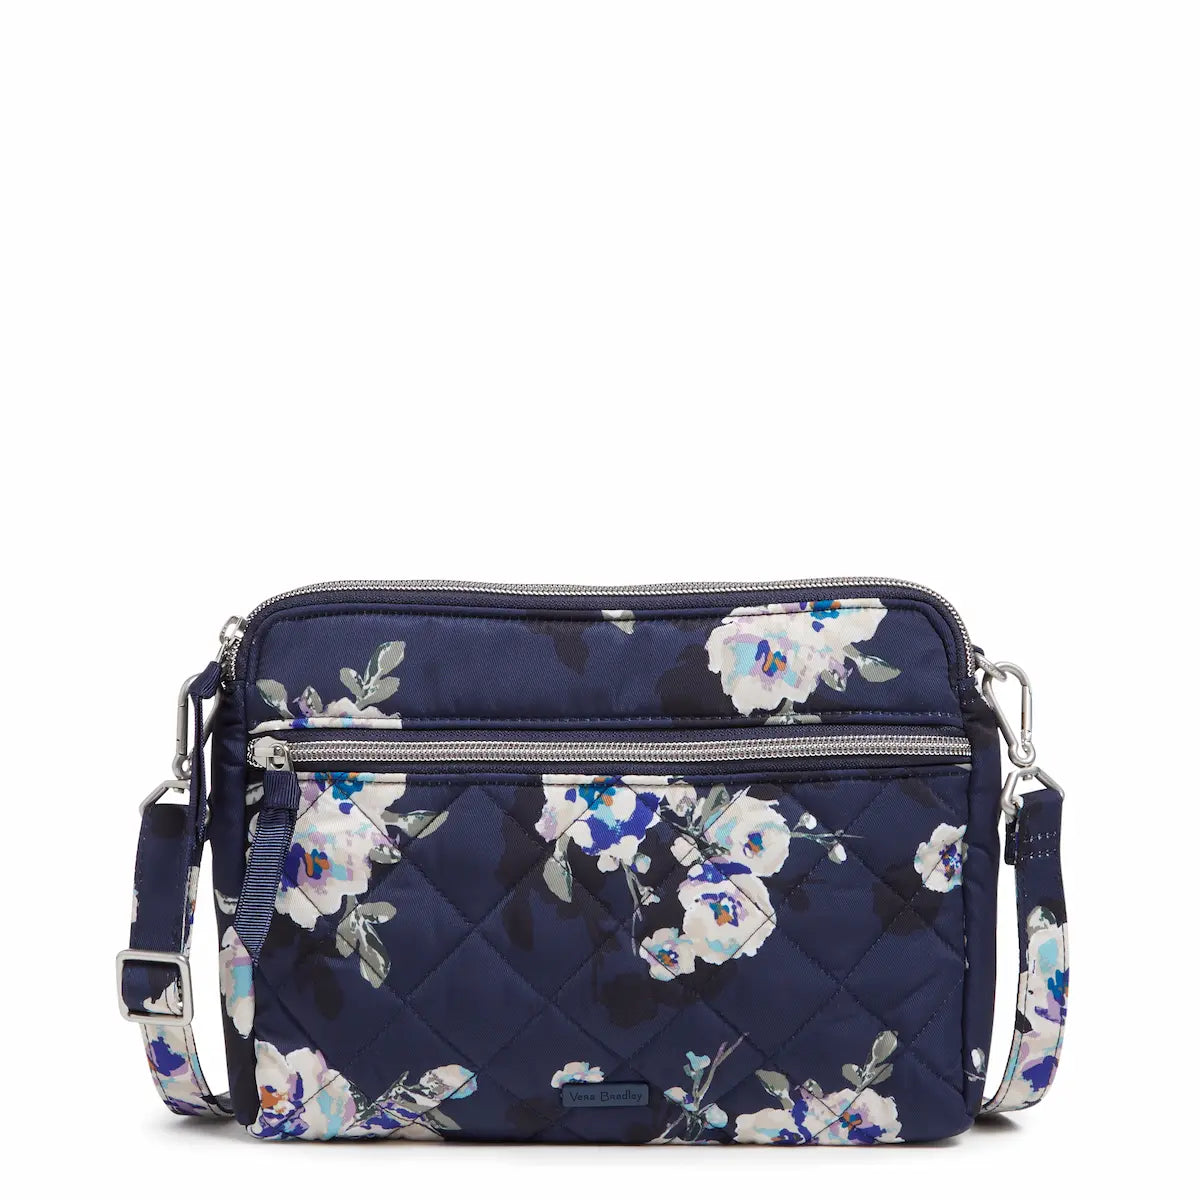 Vera Bradley Triple Compartment Crossbody Blooms and Branches Navy.